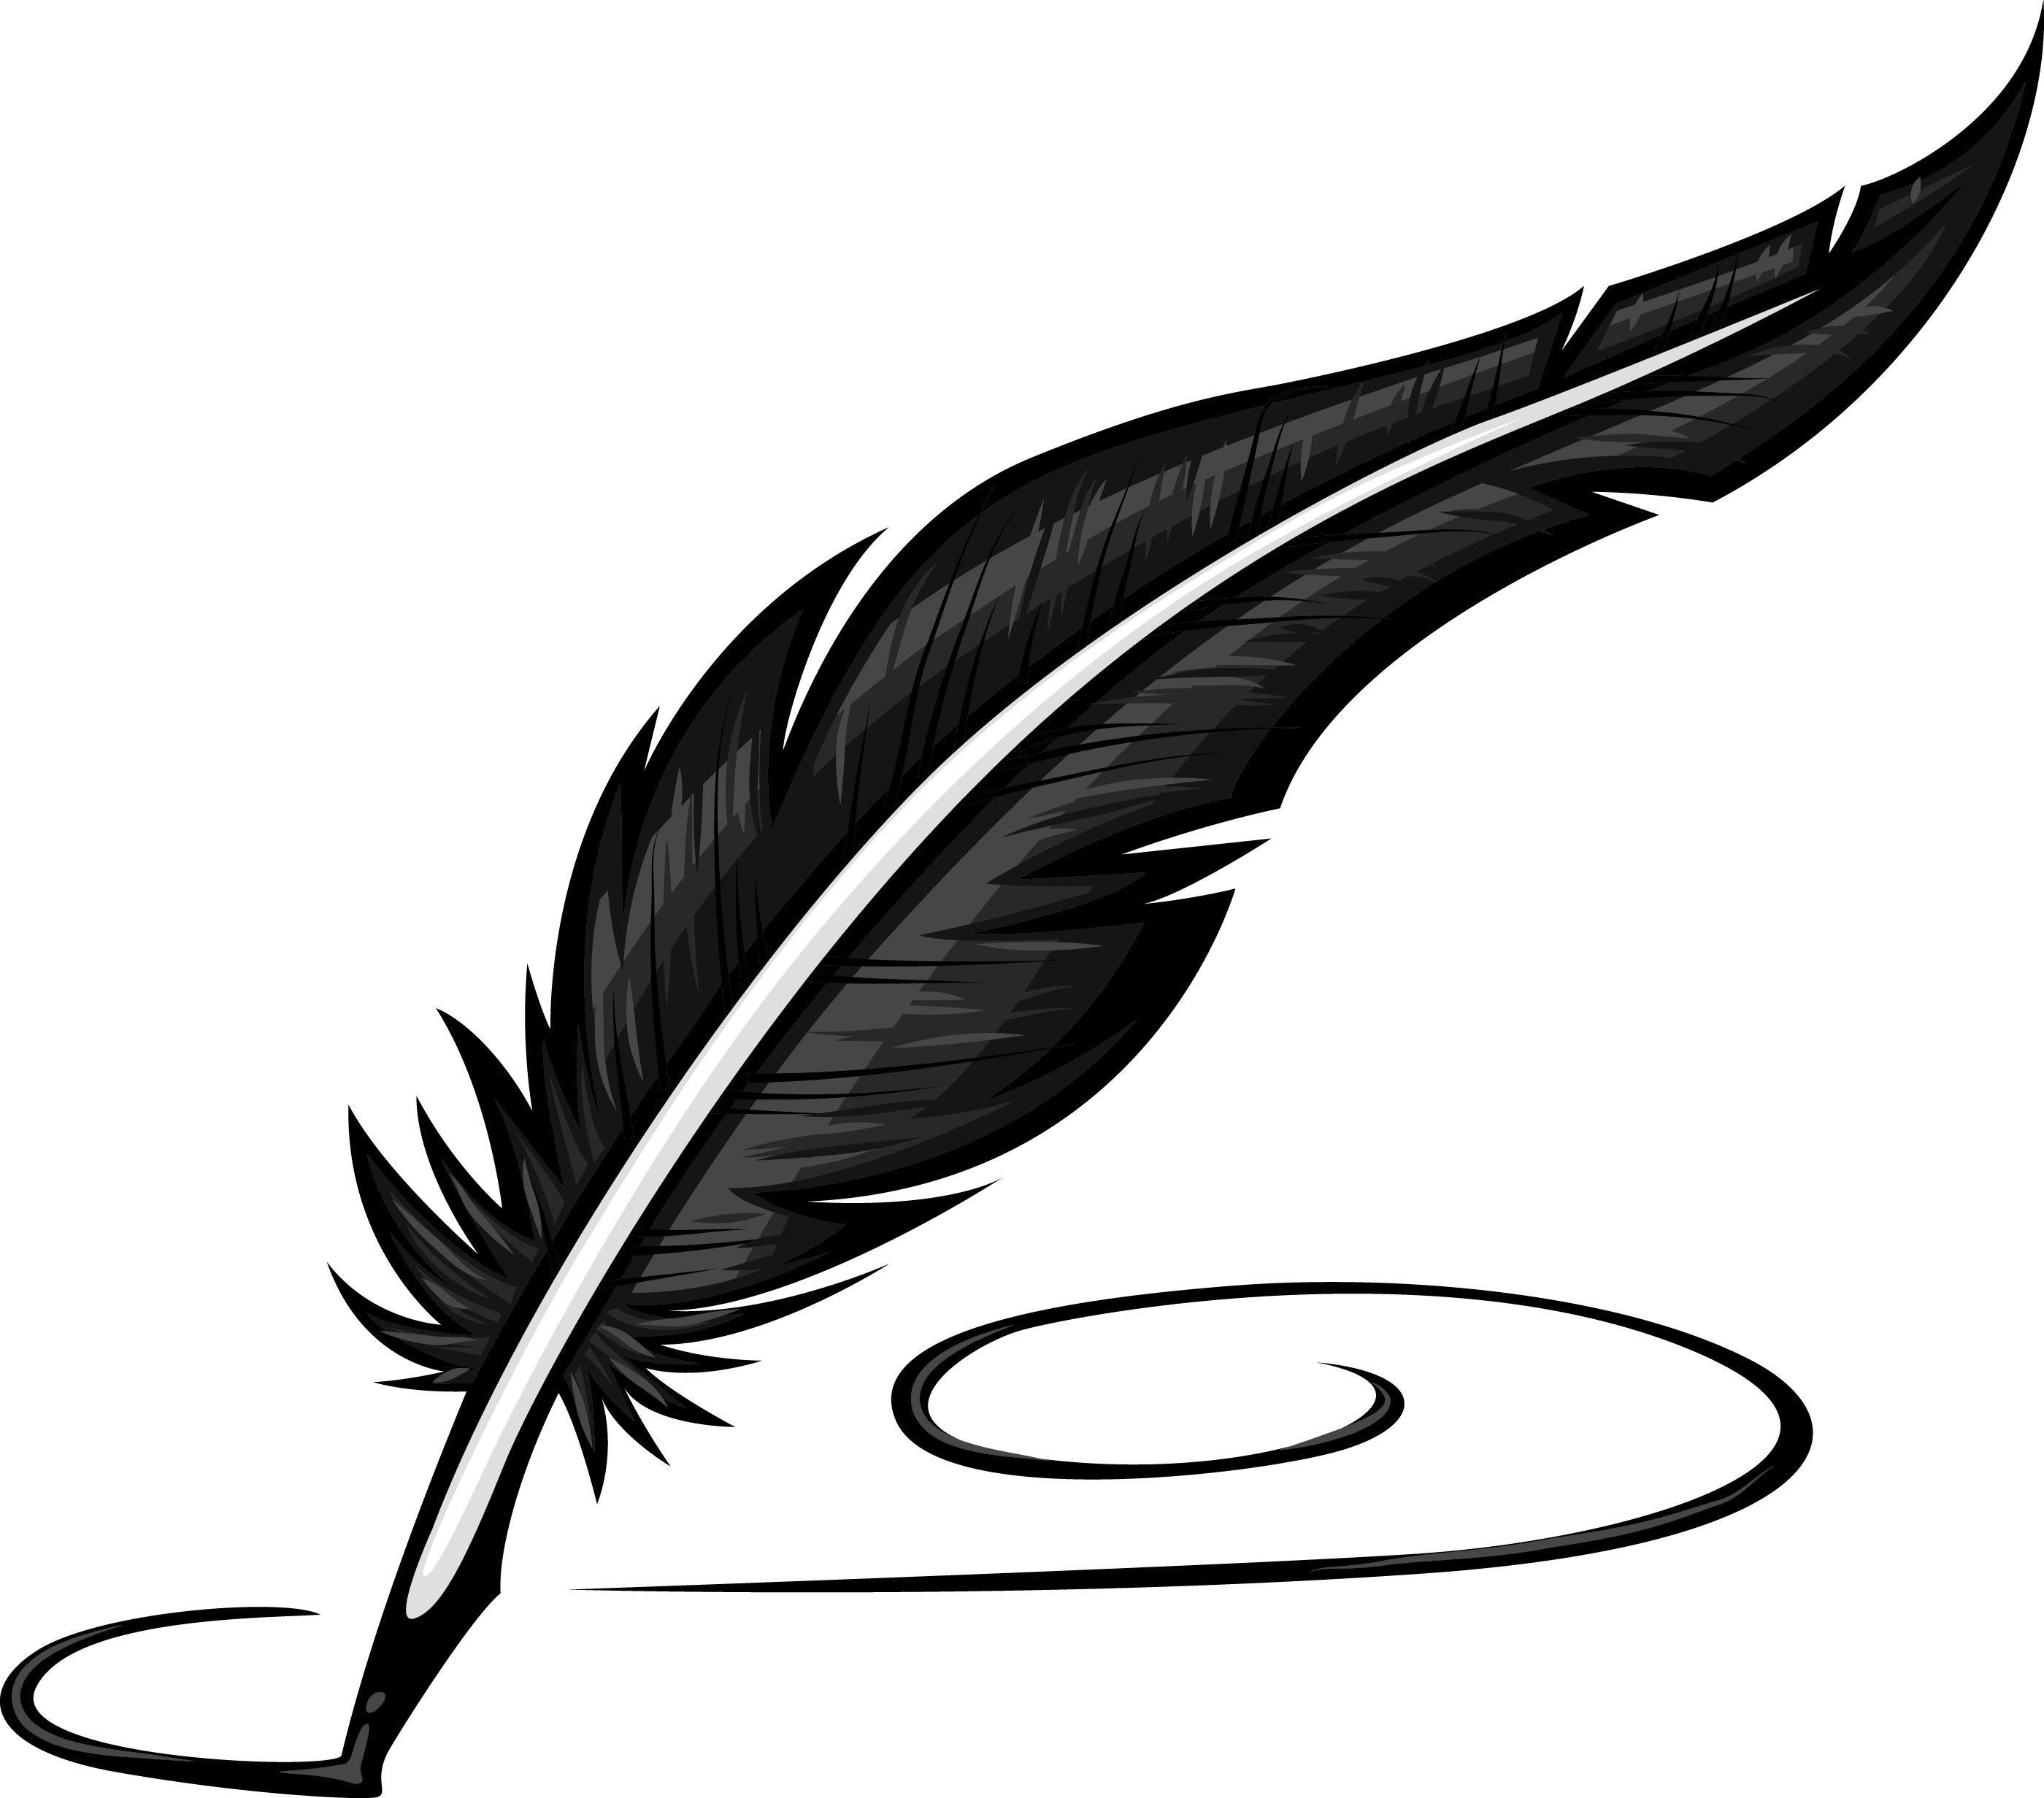 Black and White Quill Logo - Free Quill Pen Images, Download Free Clip Art, Free Clip Art on ...